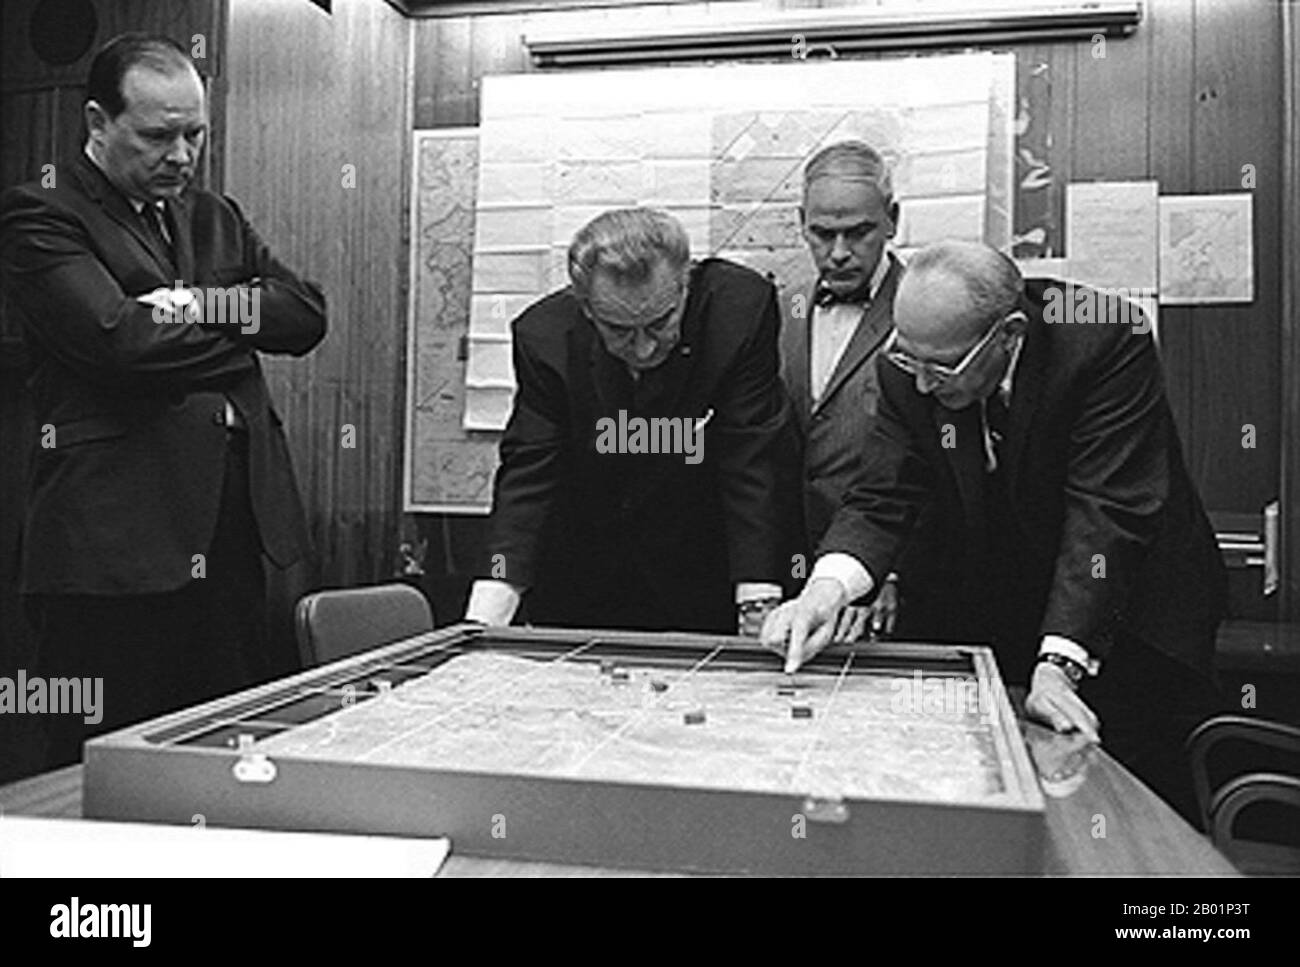 Vietnam/USA:  Walt Rostow showing President Lyndon B. Johnson a model of the Khe Sanh area, 1968  Walt Whitman Rostow (7 October 1916 - 13 February 2003), also known as Walt Rostow or W.W. Rostow, was a United States economist and political theorist who served as Special Assistant for National Security Affairs to U.S. President Lyndon B. Johnson.  Khe Sanh Combat Base was a United States Marine Corps outpost in South Vietnam (MGRS 48QXD850418) used during the Vietnam War. The airstrip was built in September 1962. Fighting began there in late April of 1967 known as the 'Hill Fights'. Stock Photo